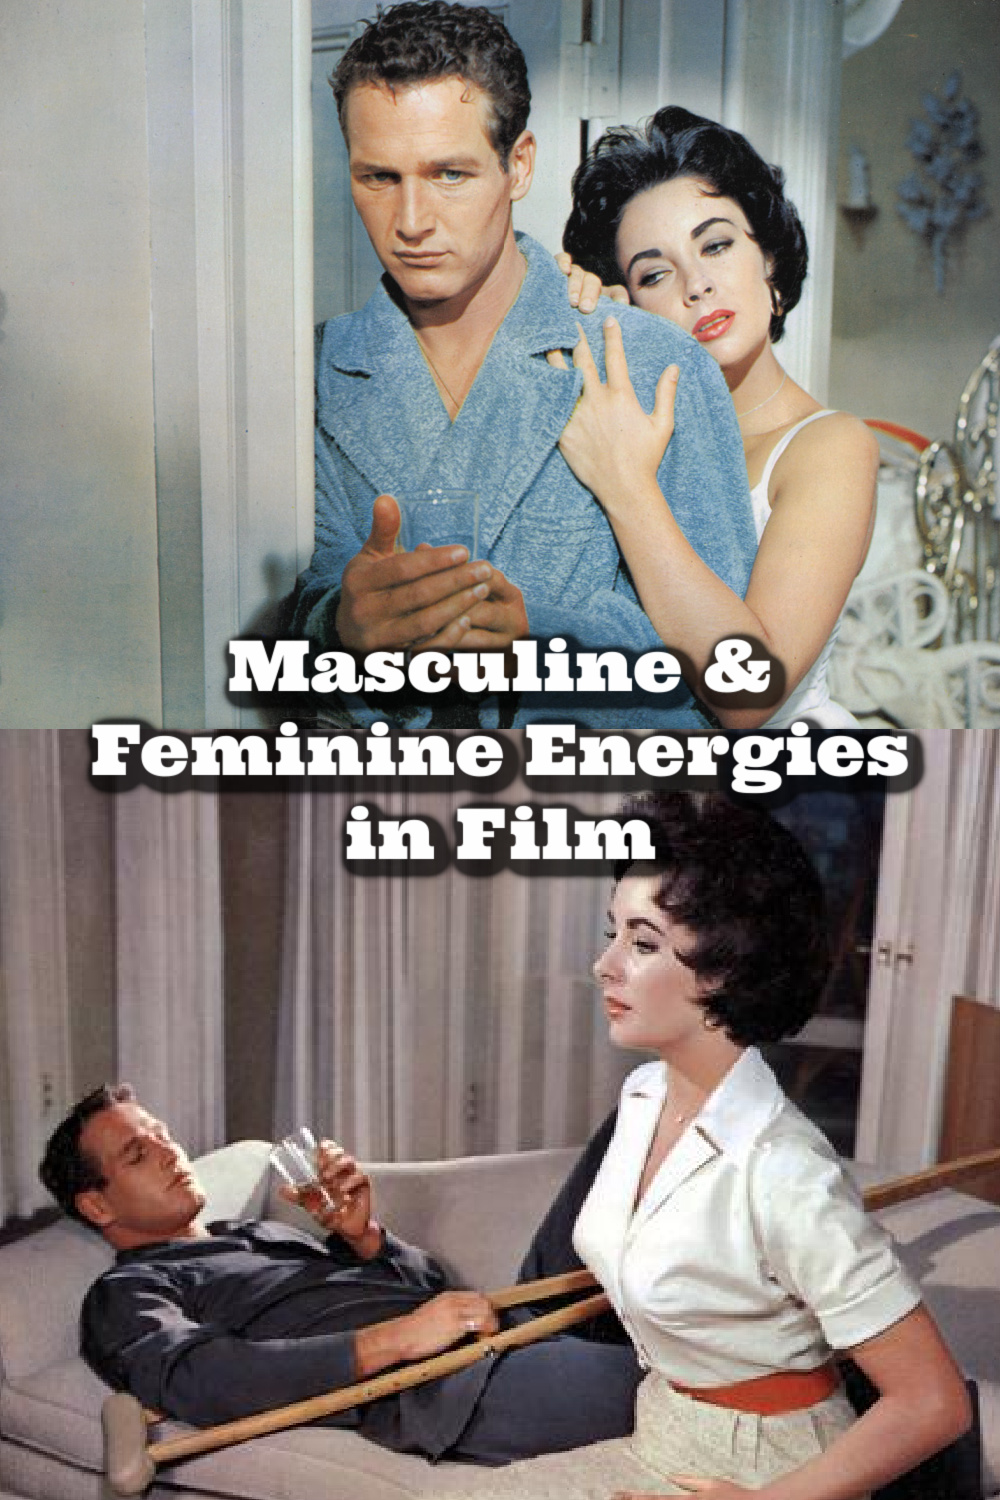 wounded femininity in men, femininity in relationships, cat on a hot tin roof scene, wounded feminine energy traits, wounded feminine and masculine, wounded feminine energy in a man, cat on a hot tin roof scene breakdown, wounded femininity, toxic femininity in movies, elizabeth taylor femininity, paul newman cat on a hot tin roof, how to create polarity in relationships, passive men, feminine movie character breakdown, feminine film, femininity in film, masculine and feminine examples, feminine films, femininity in movies, understanding masculine and feminine energy, understanding masculine and feminine energy beginners guide, feminine and masculine energy in relationships, difference between feminine and masculine energy, divine masculine and feminine healing energy, feminine energy, feminine and masculine energy balance, feminine and masculine energy traits, feminine masculine energy, feminine energy vs masculine energy, masculine energy, masculine energy vs feminine energy, masculine vs feminine, Everyday starlet, sarah blodgett,